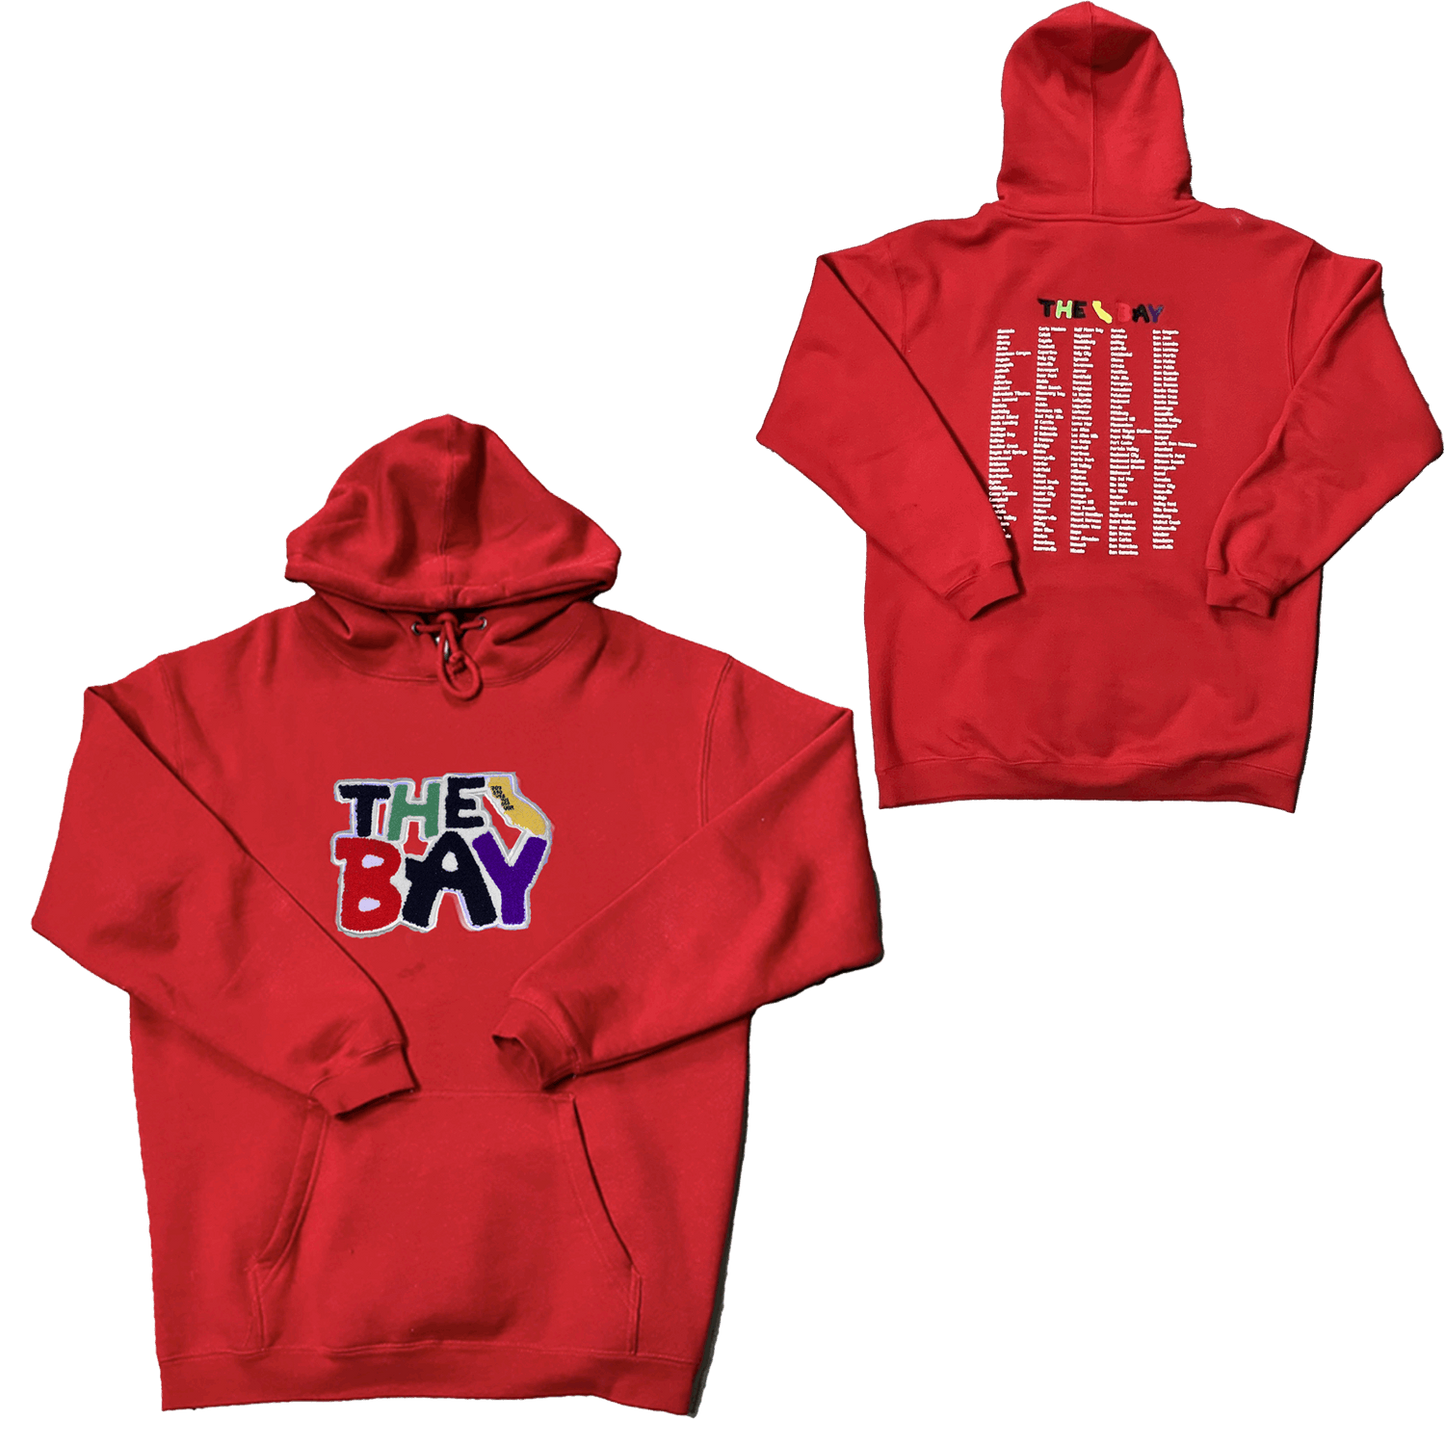 Stylish and vibrant red hoodie for a bold and fashionable look.